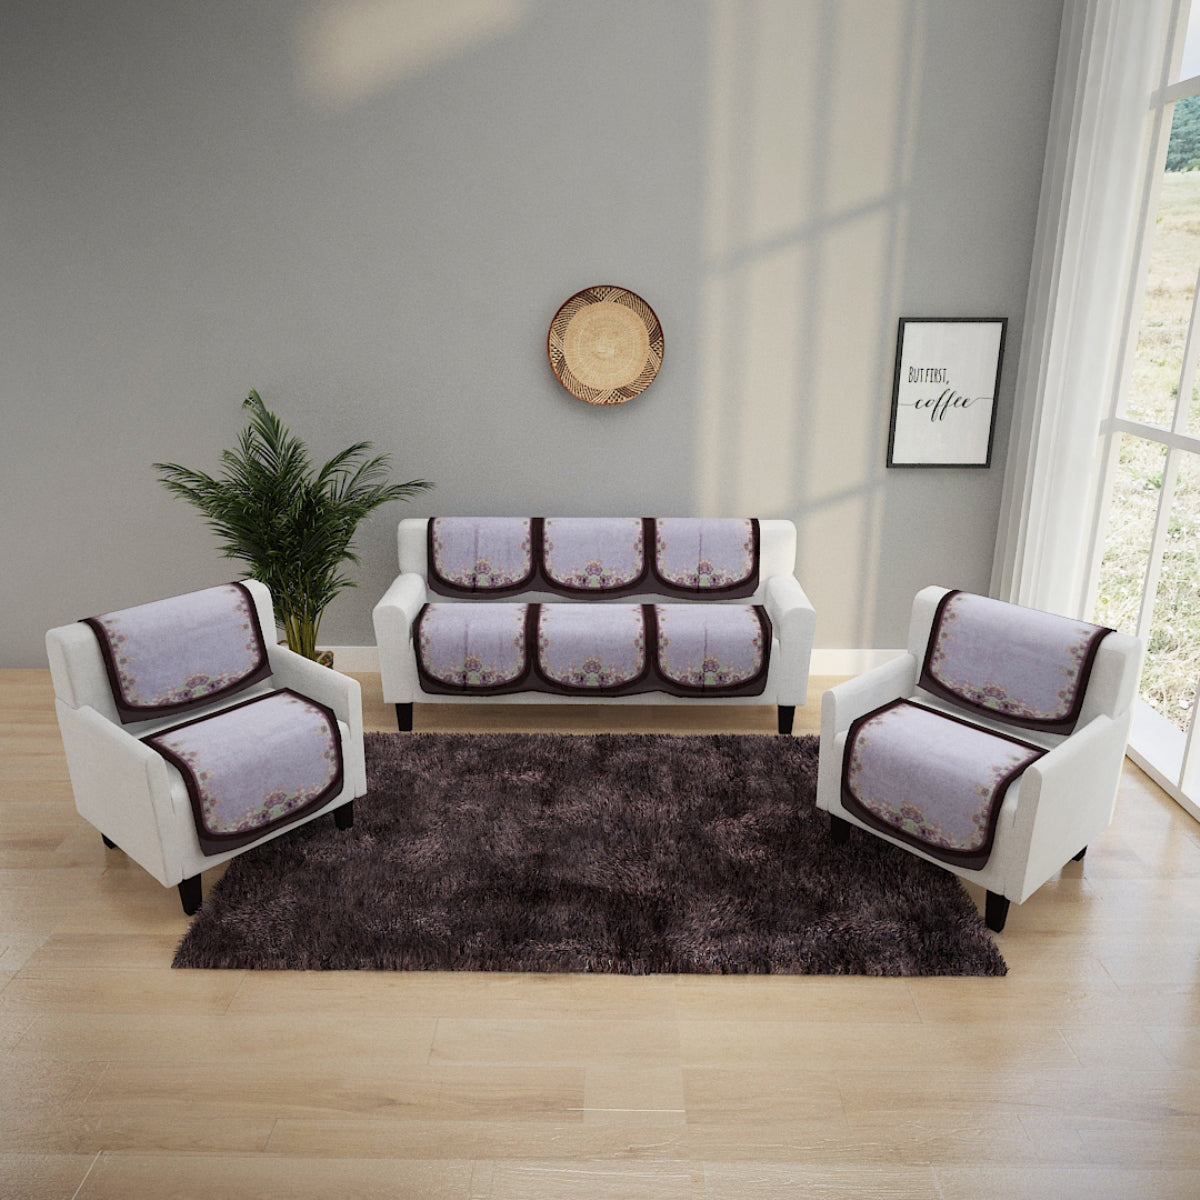 6-Pieces Off White Woven Design 5-Seater Sofa Covers